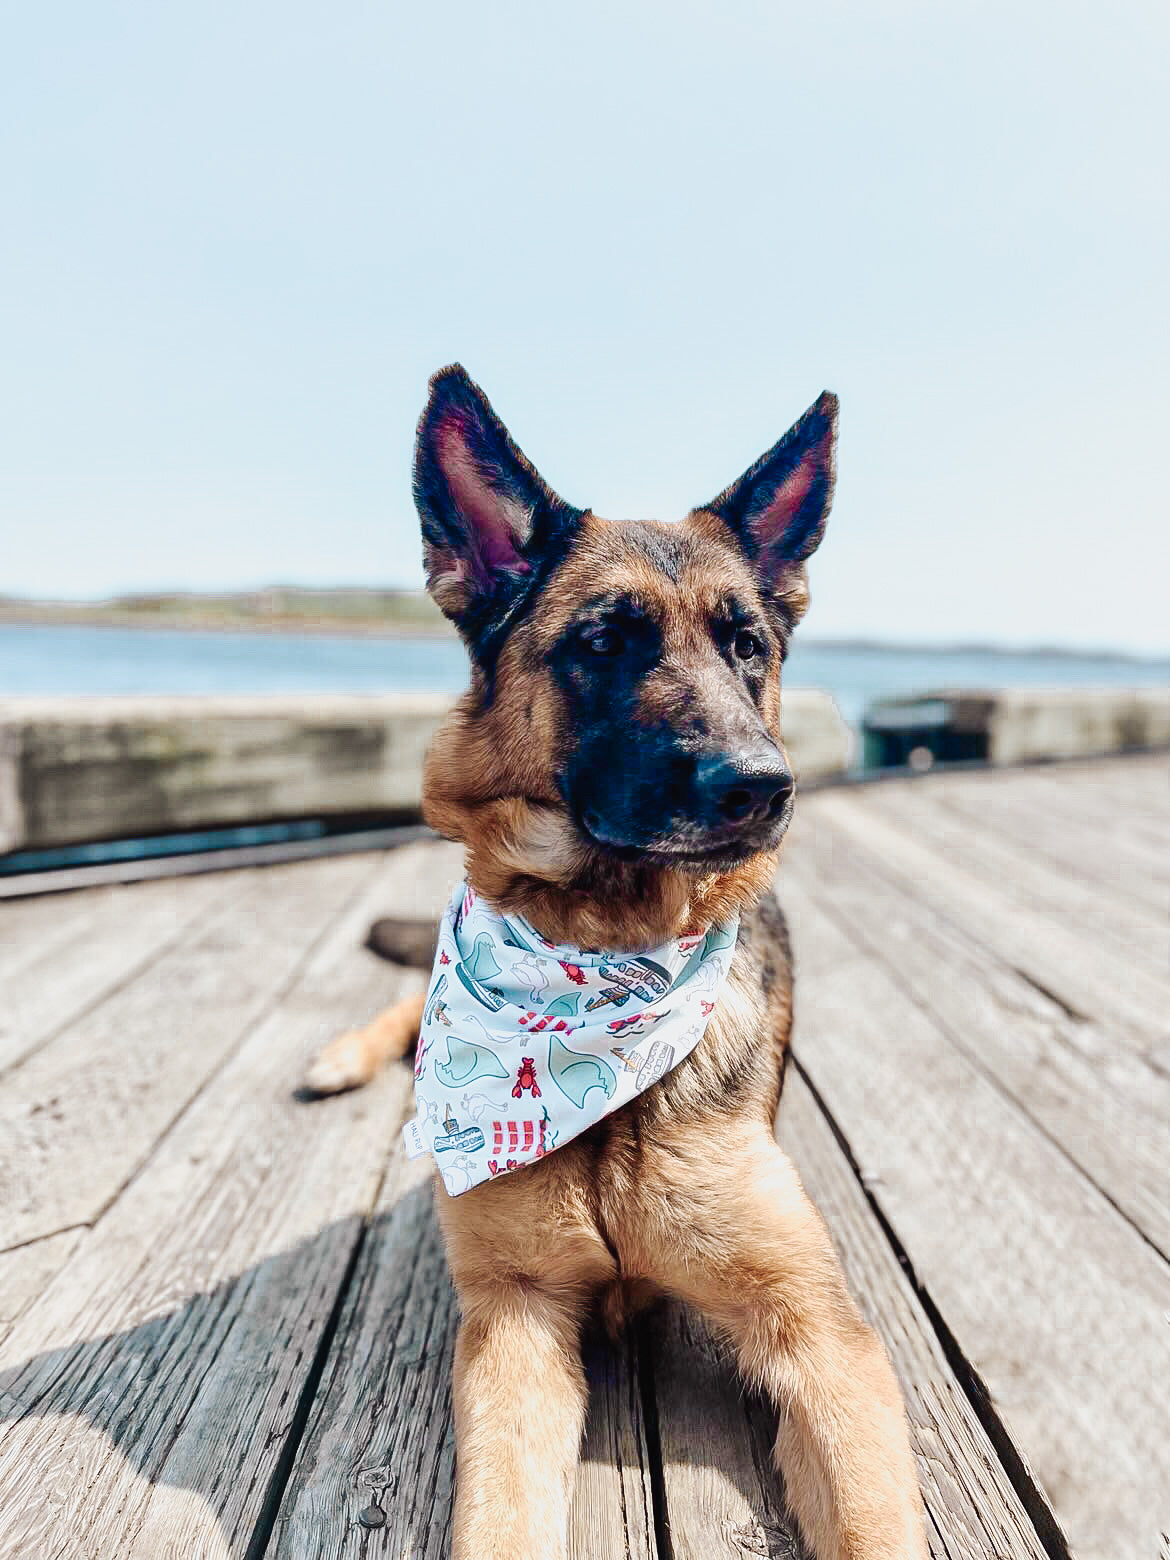 Nauti Dog Bandana. Handcrafted Dog Accessories for Your Pet